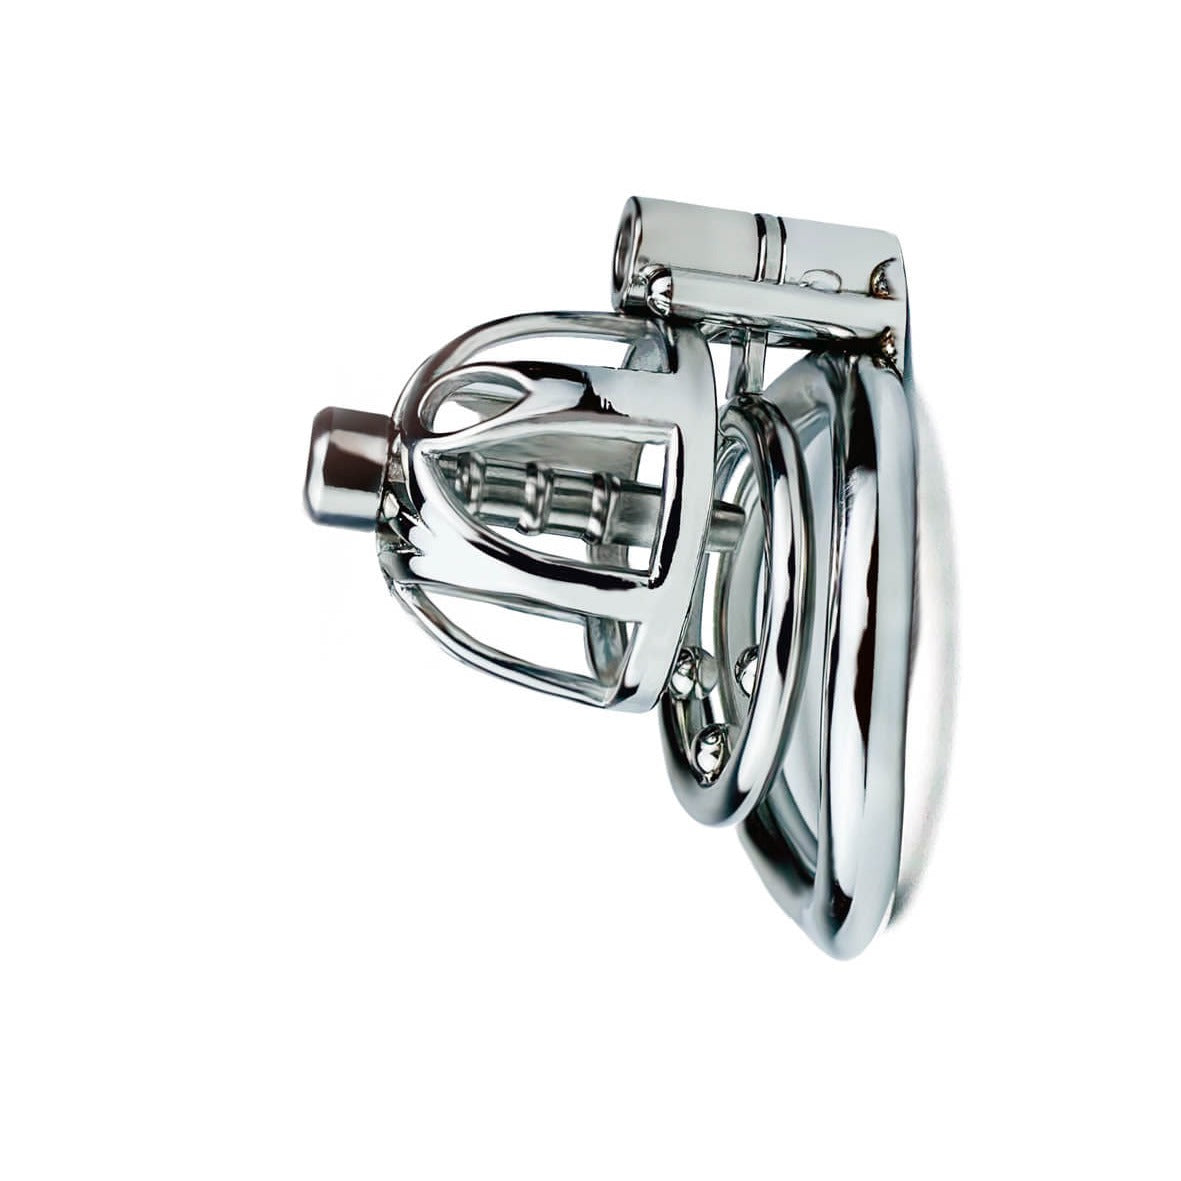 Male Stainless Steel Chastity Cage With Silicone/Metal Urethral Tube - KeepMeLocked